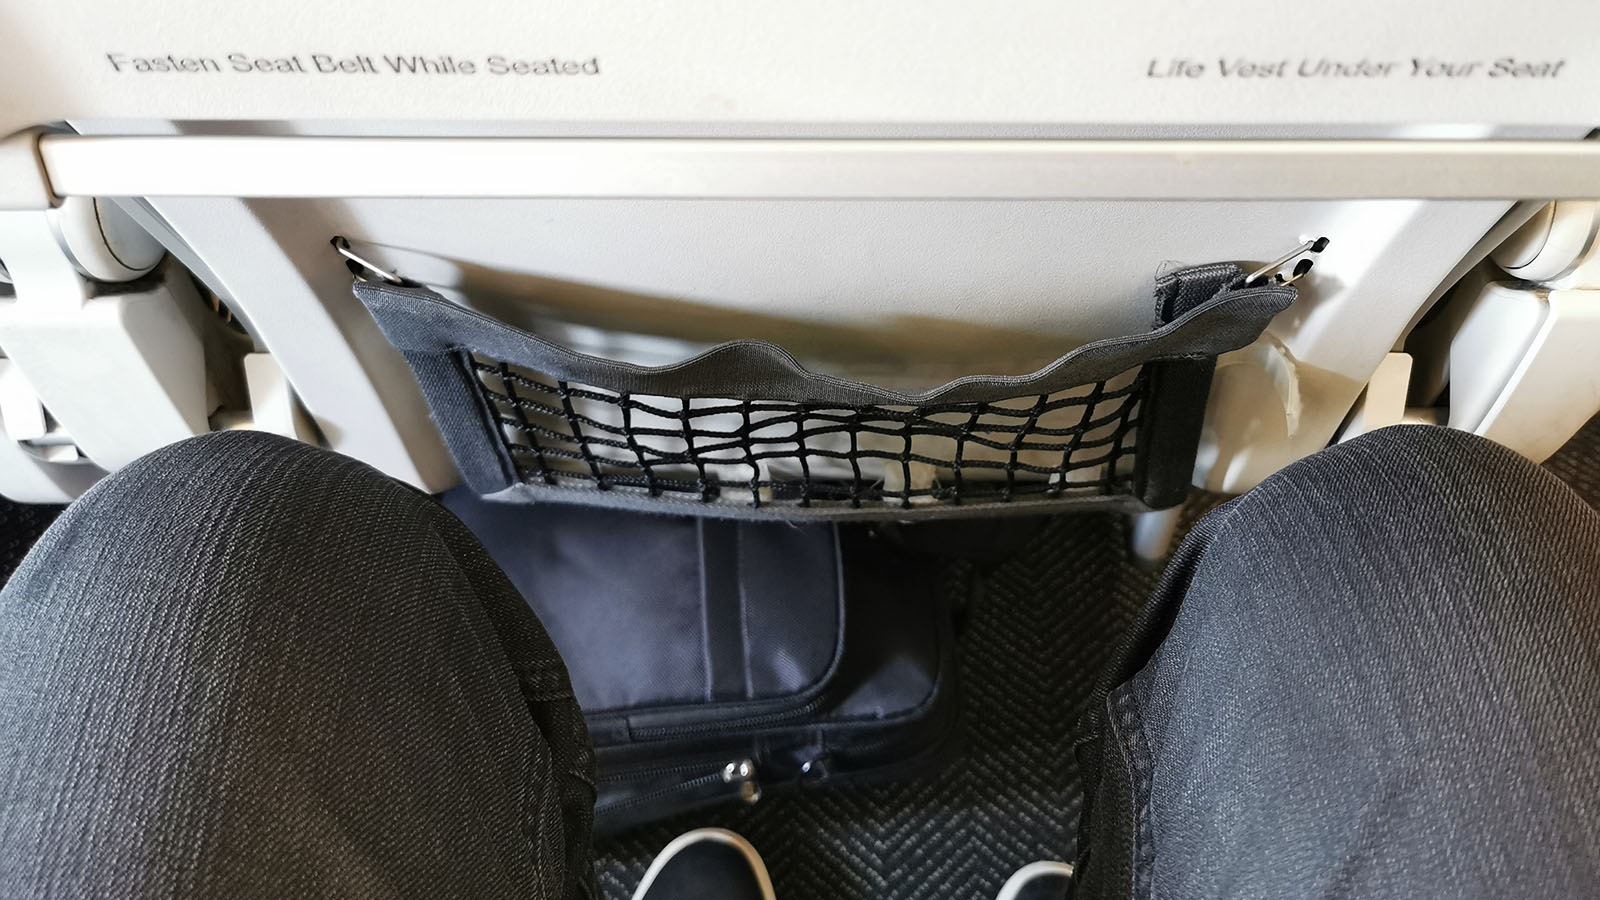 Space for knees in Economy on United Airlines' Airbus A319